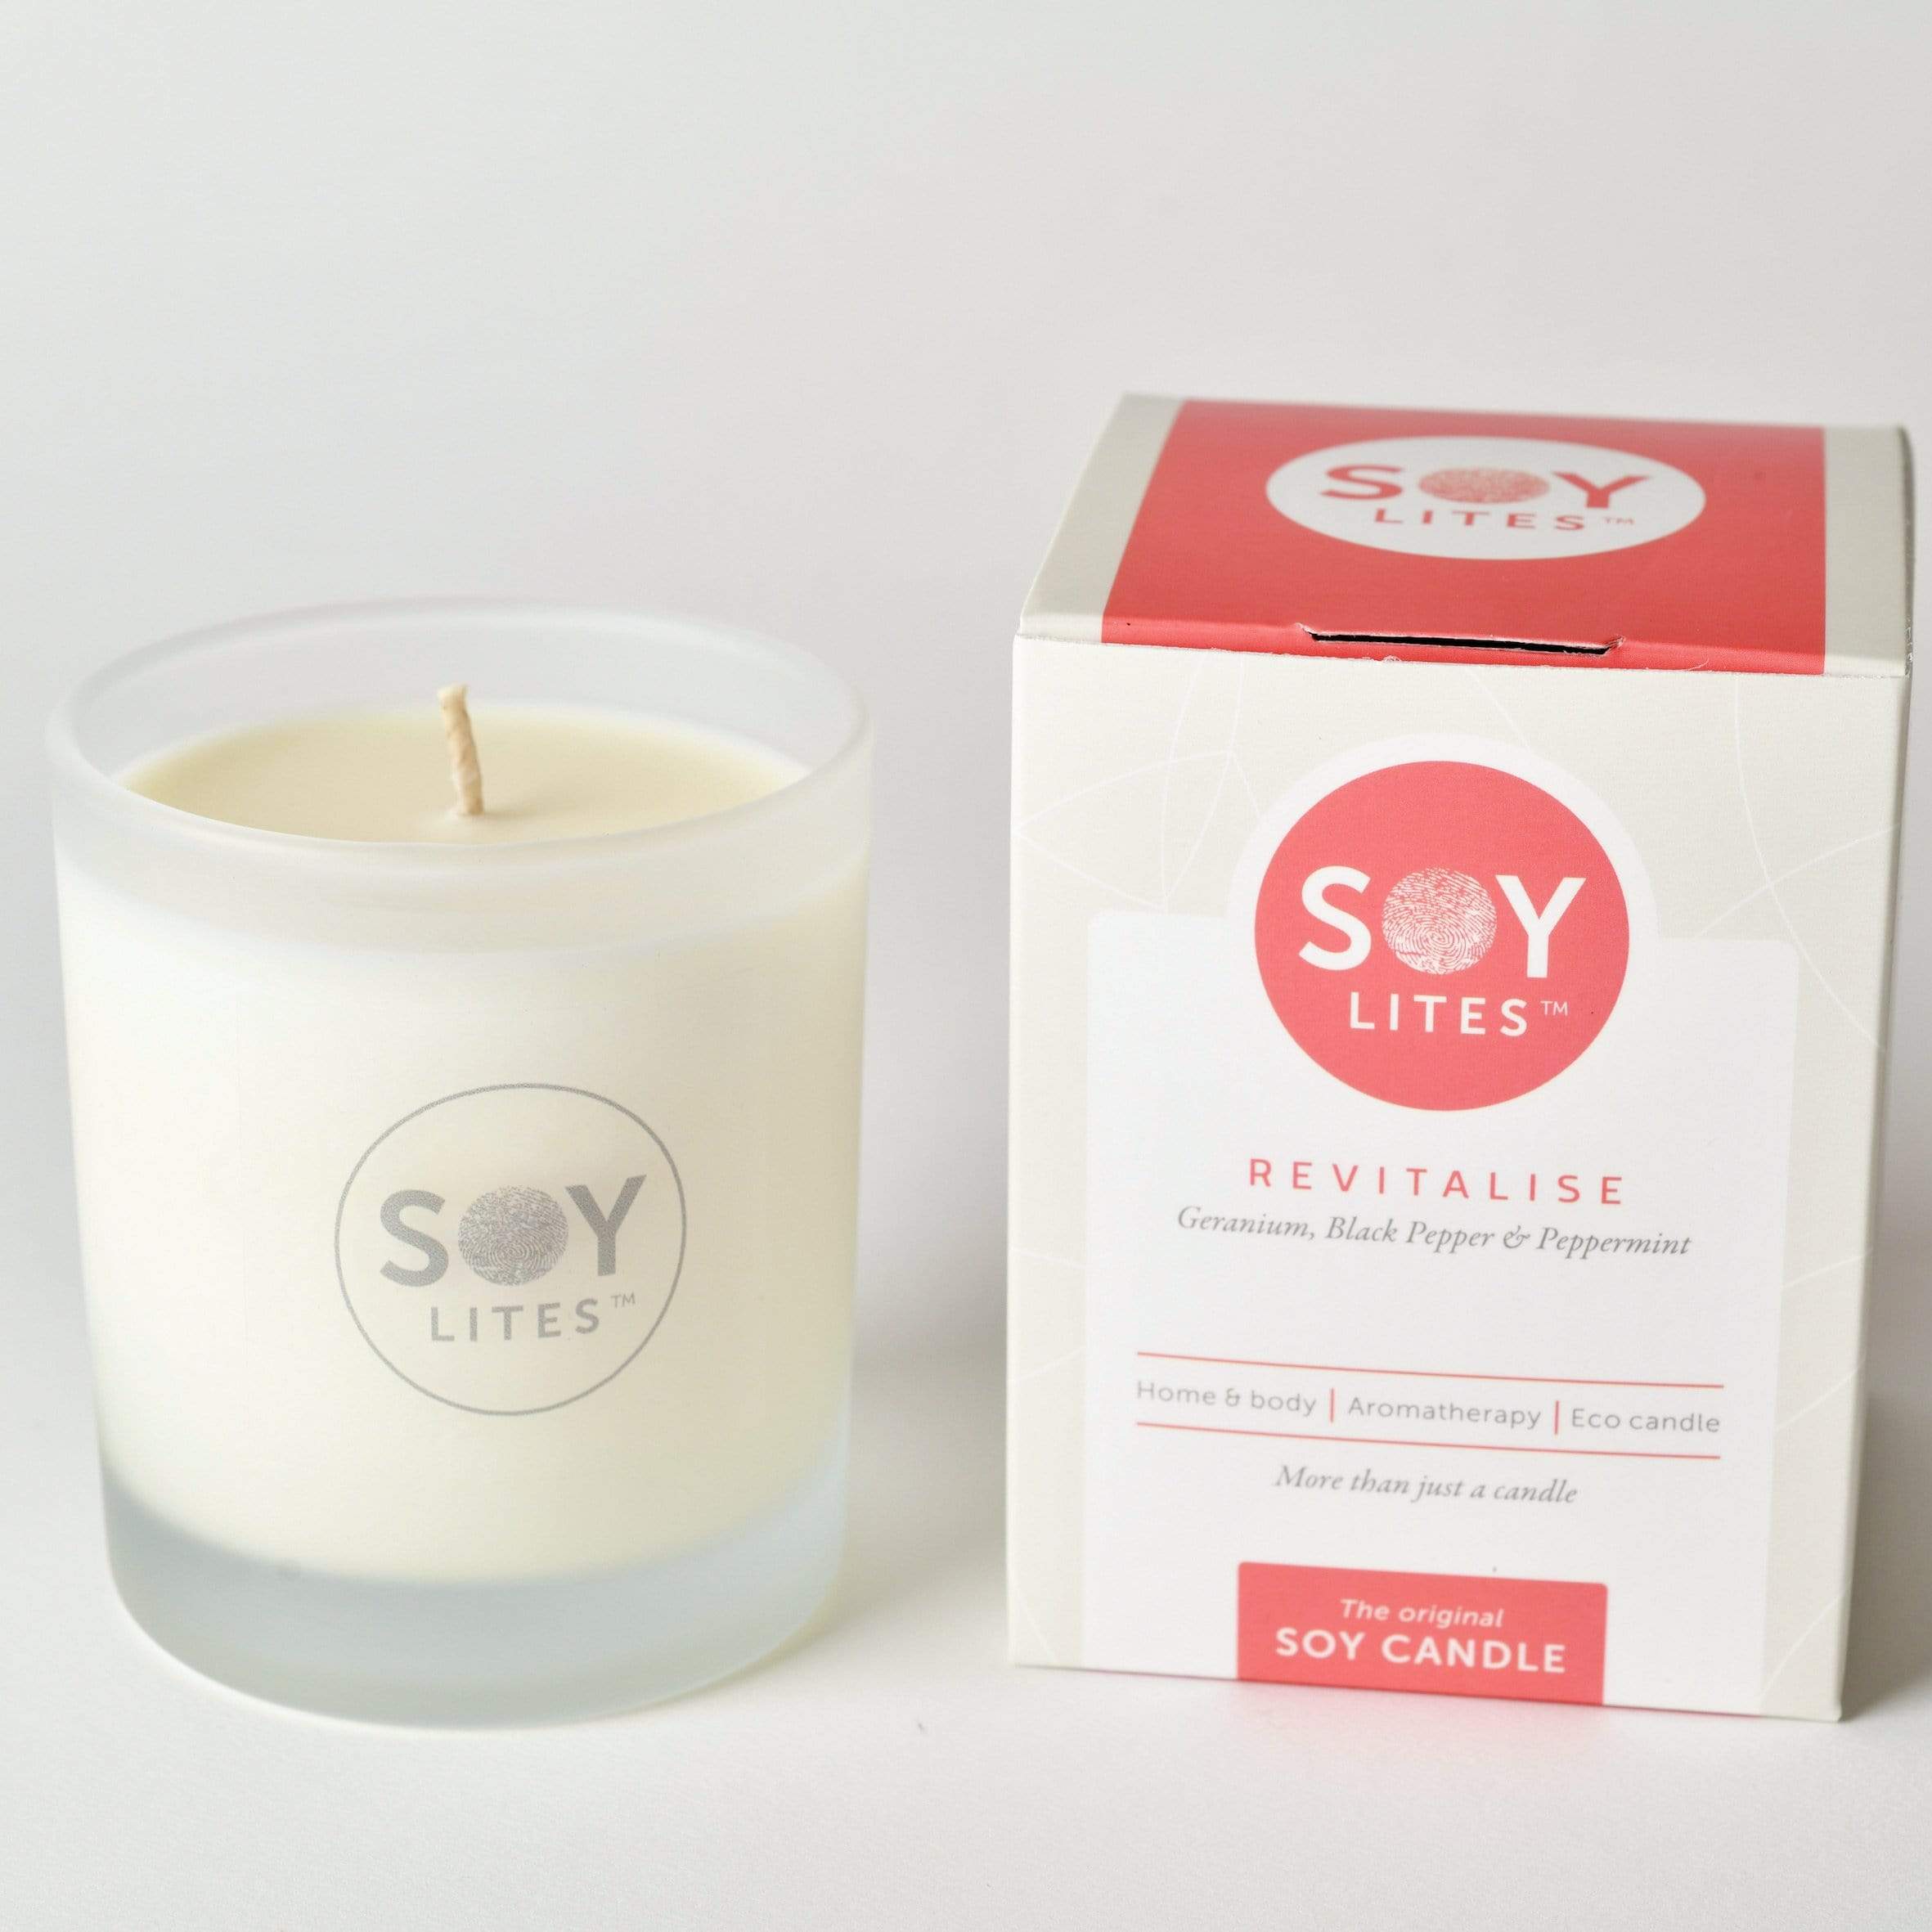 SoyLites Soy Aromatherapy Tumbler 220 ml Revitalise Tumbler 220ml Candle with Geranium, Black Pepper & Peppermint